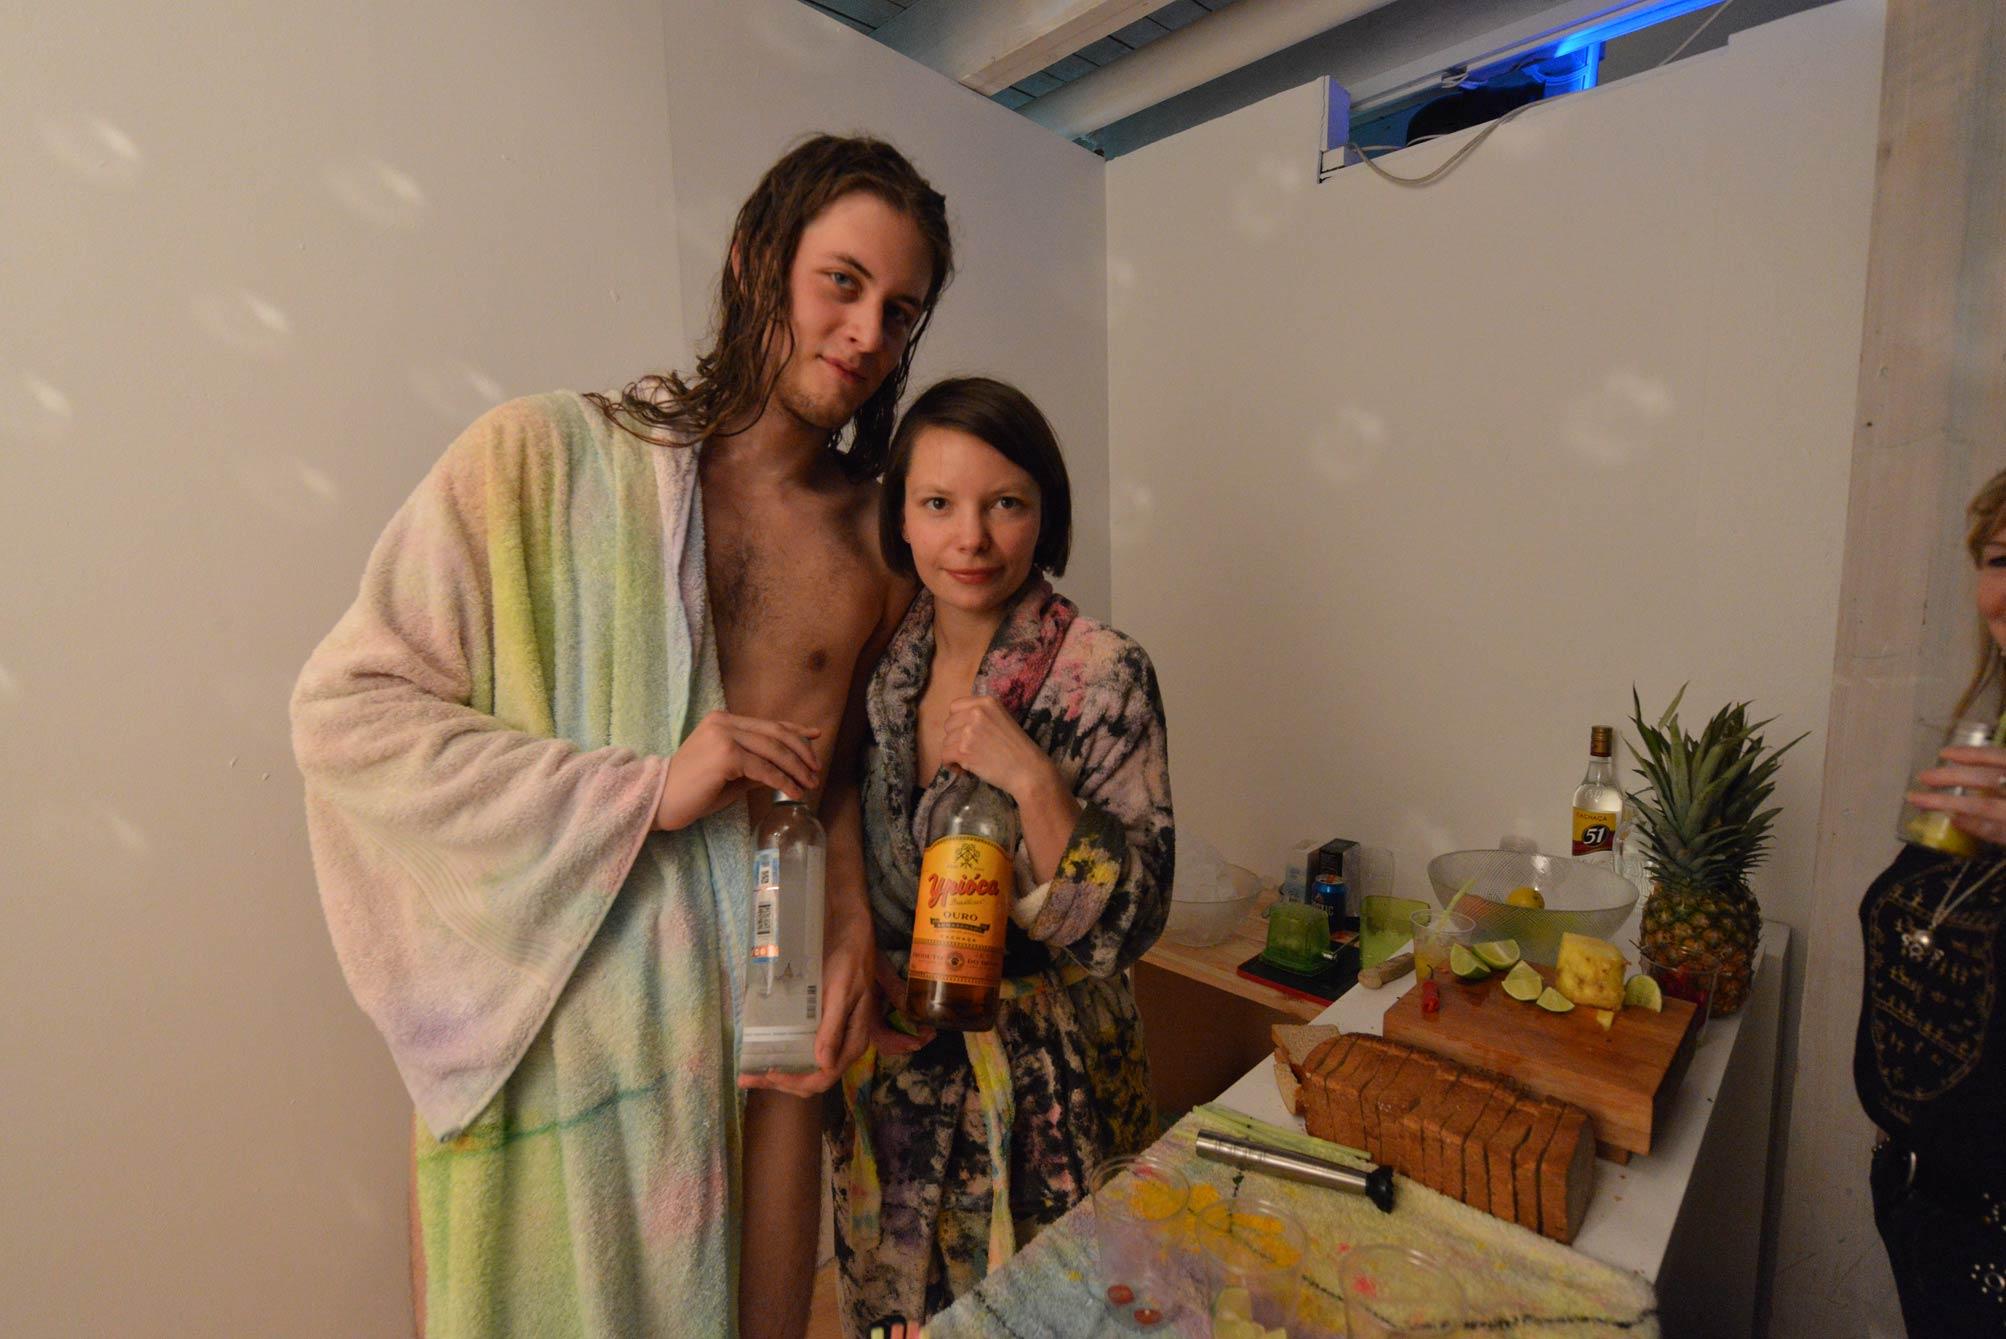 Limited edition of sauna sessions with paintings as towels and robes/ robes and towels as paintings in SmallProjects Tromso gallery. 2014/ +SlowBar by Tanya Busse/ 